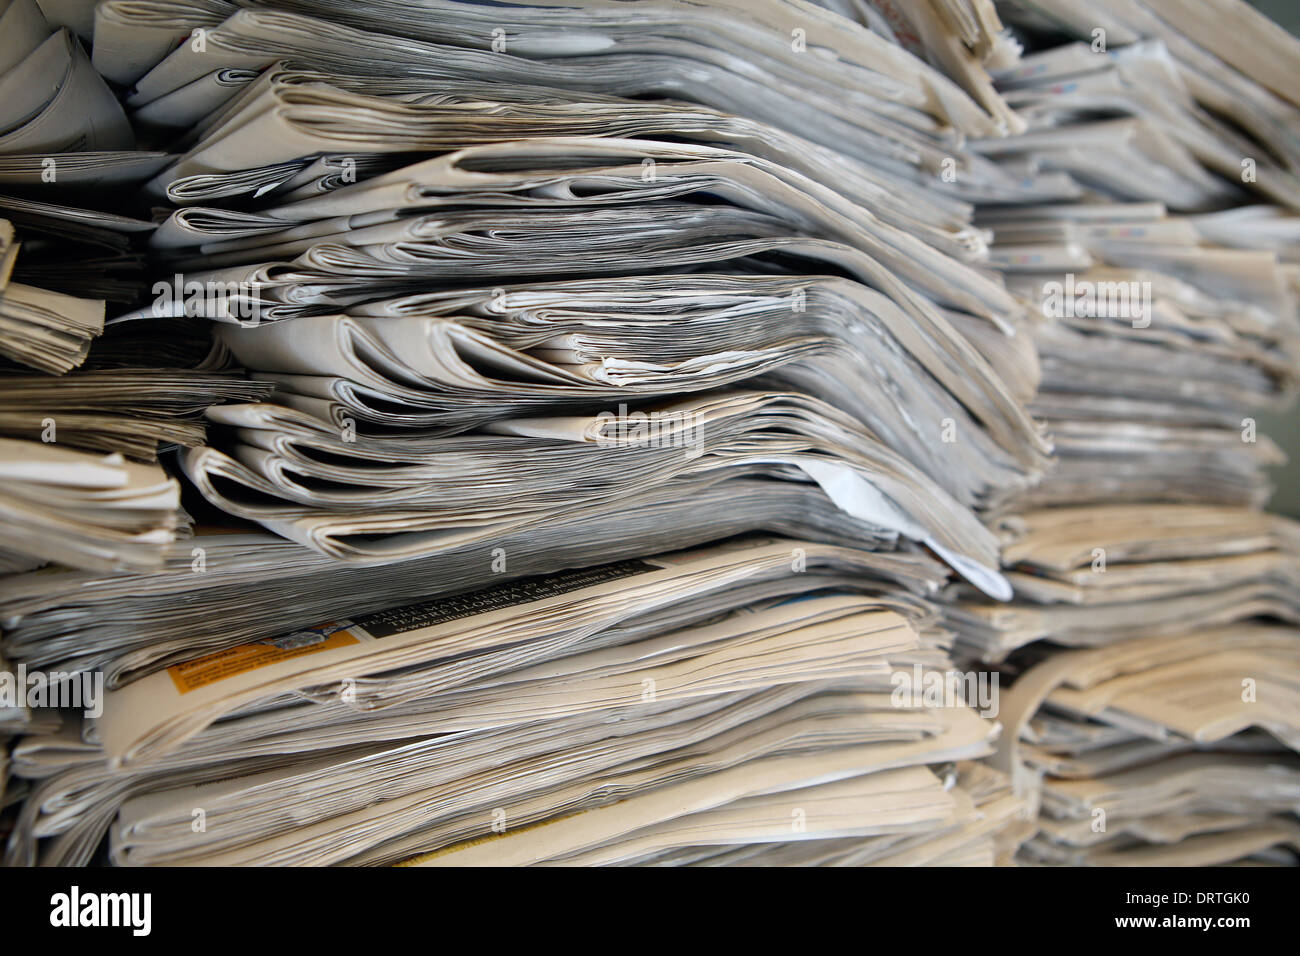 Newspapers stacked at a local paper in the island of Mallorca, Spain Stock Photo